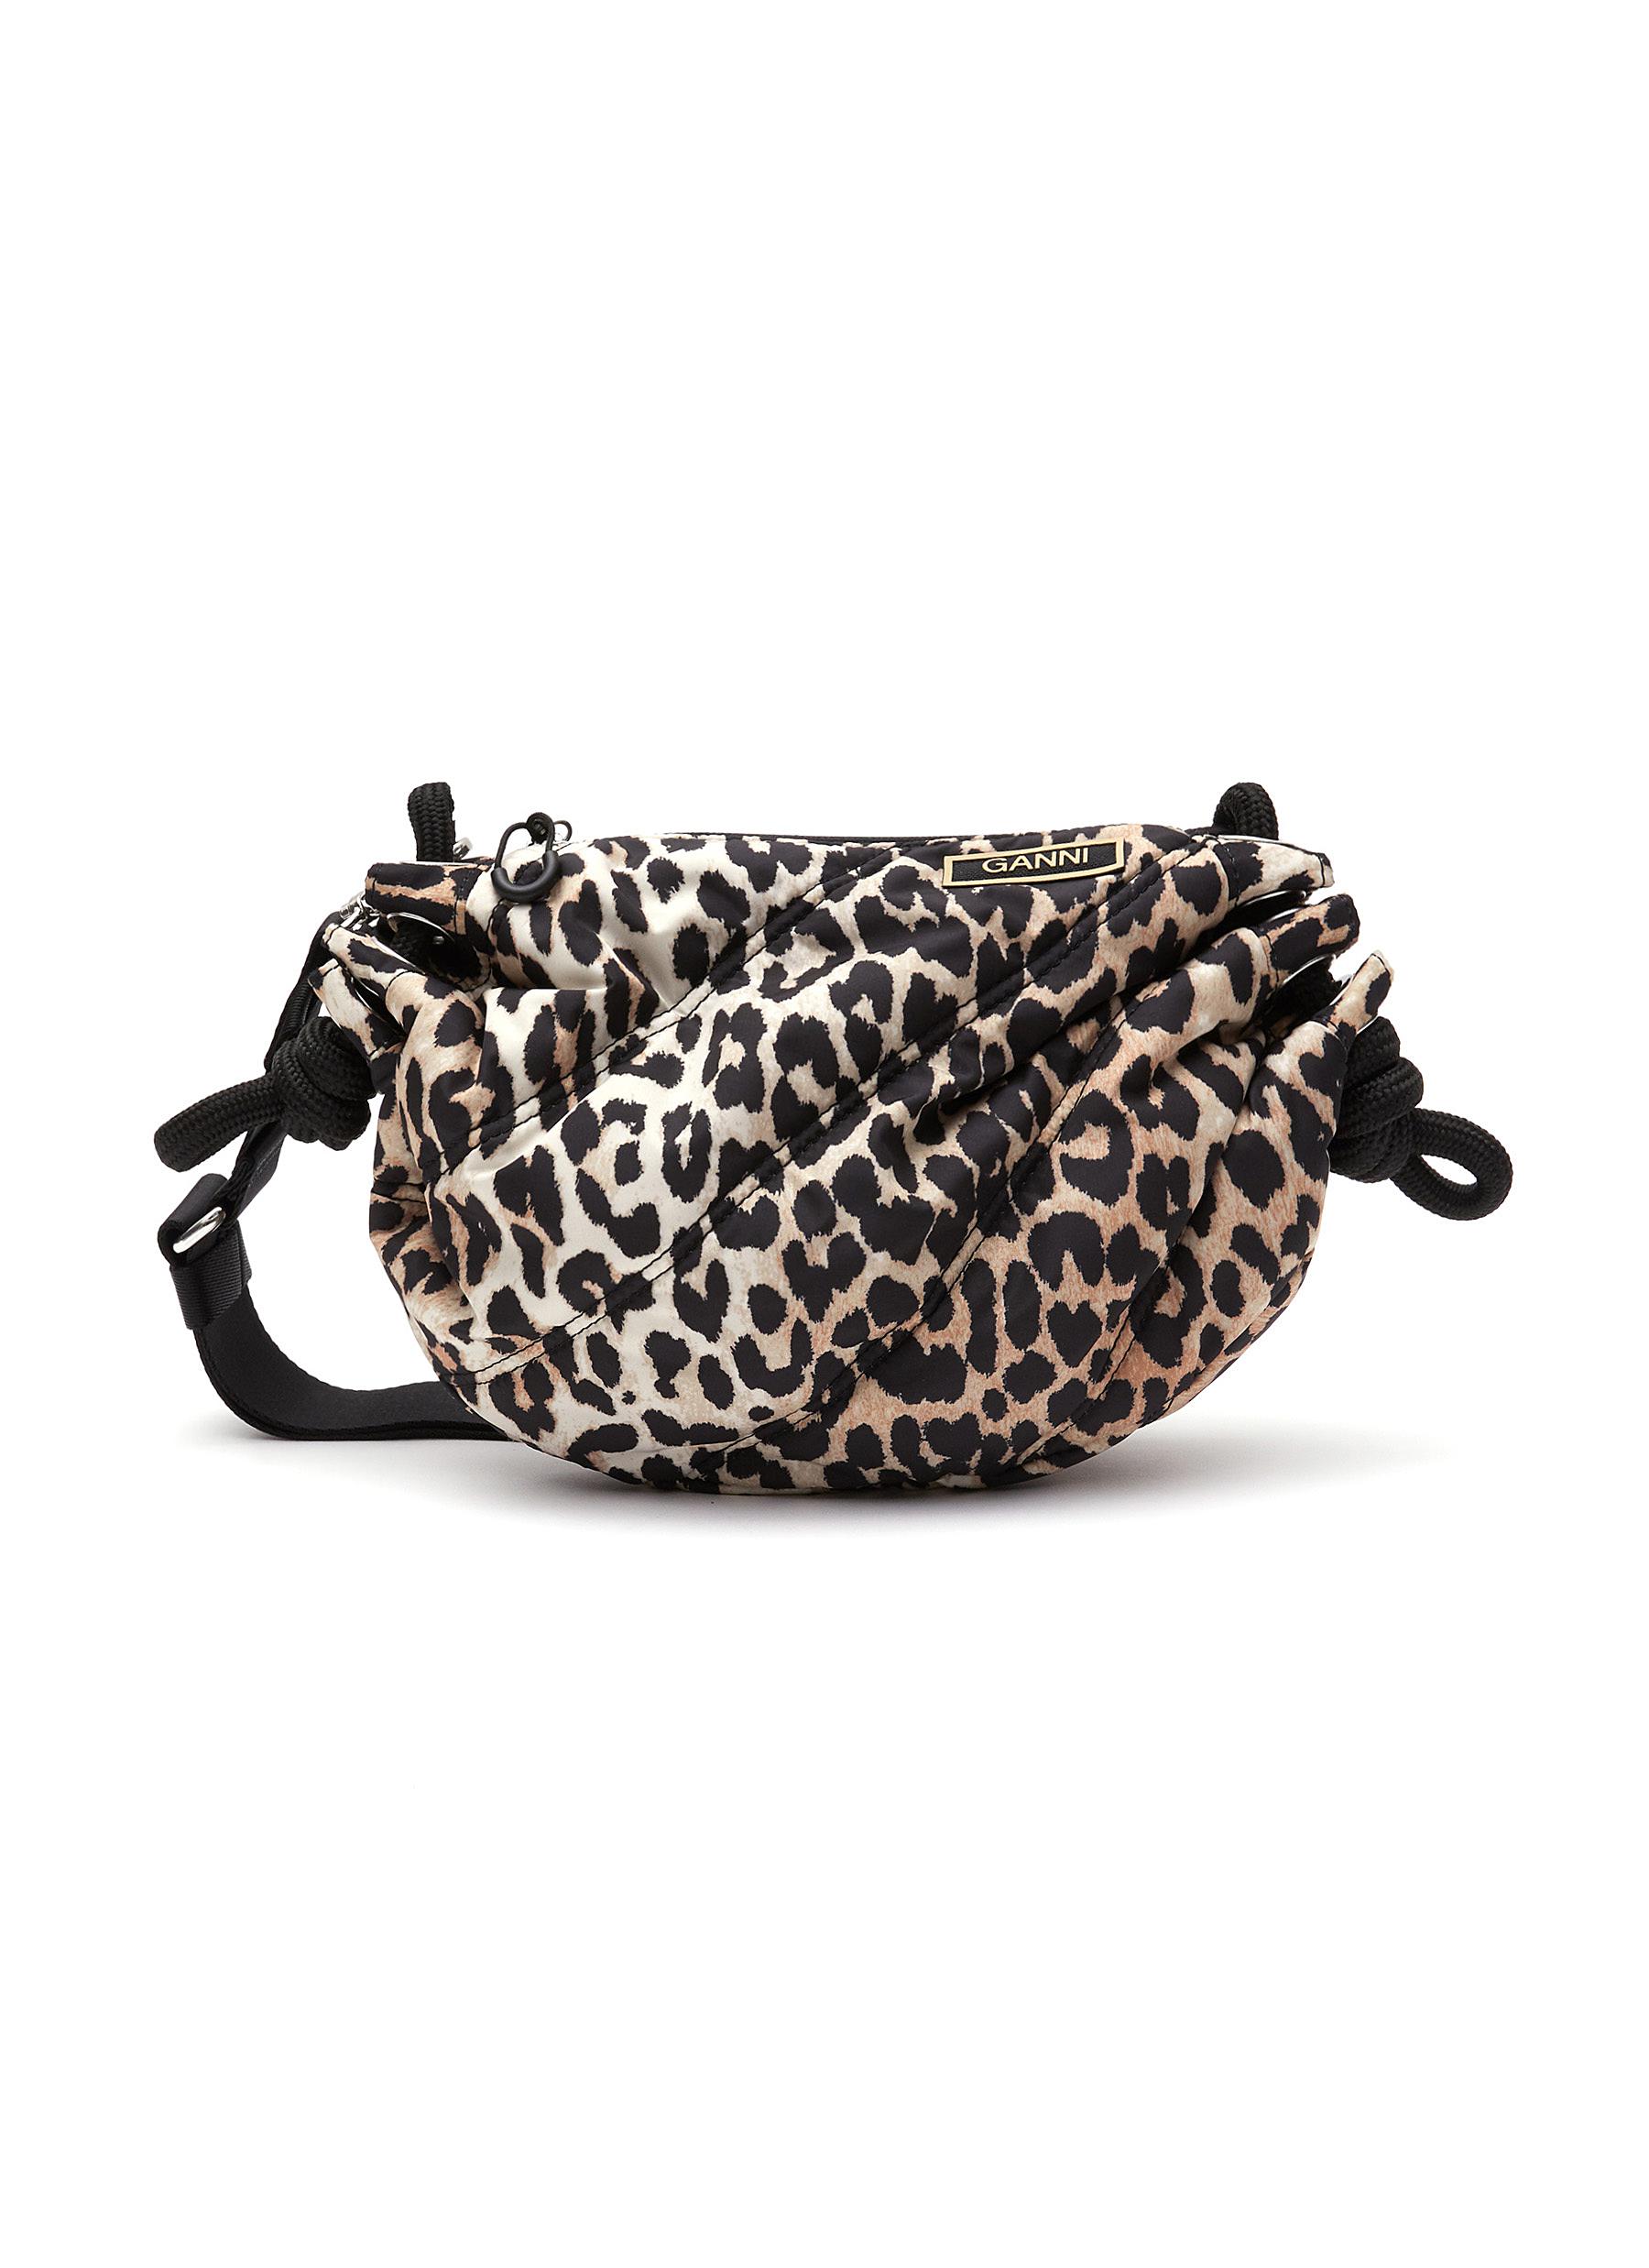 GANNI LEOPARD PRINT QUILTED SMALL CROSSBODY BAG